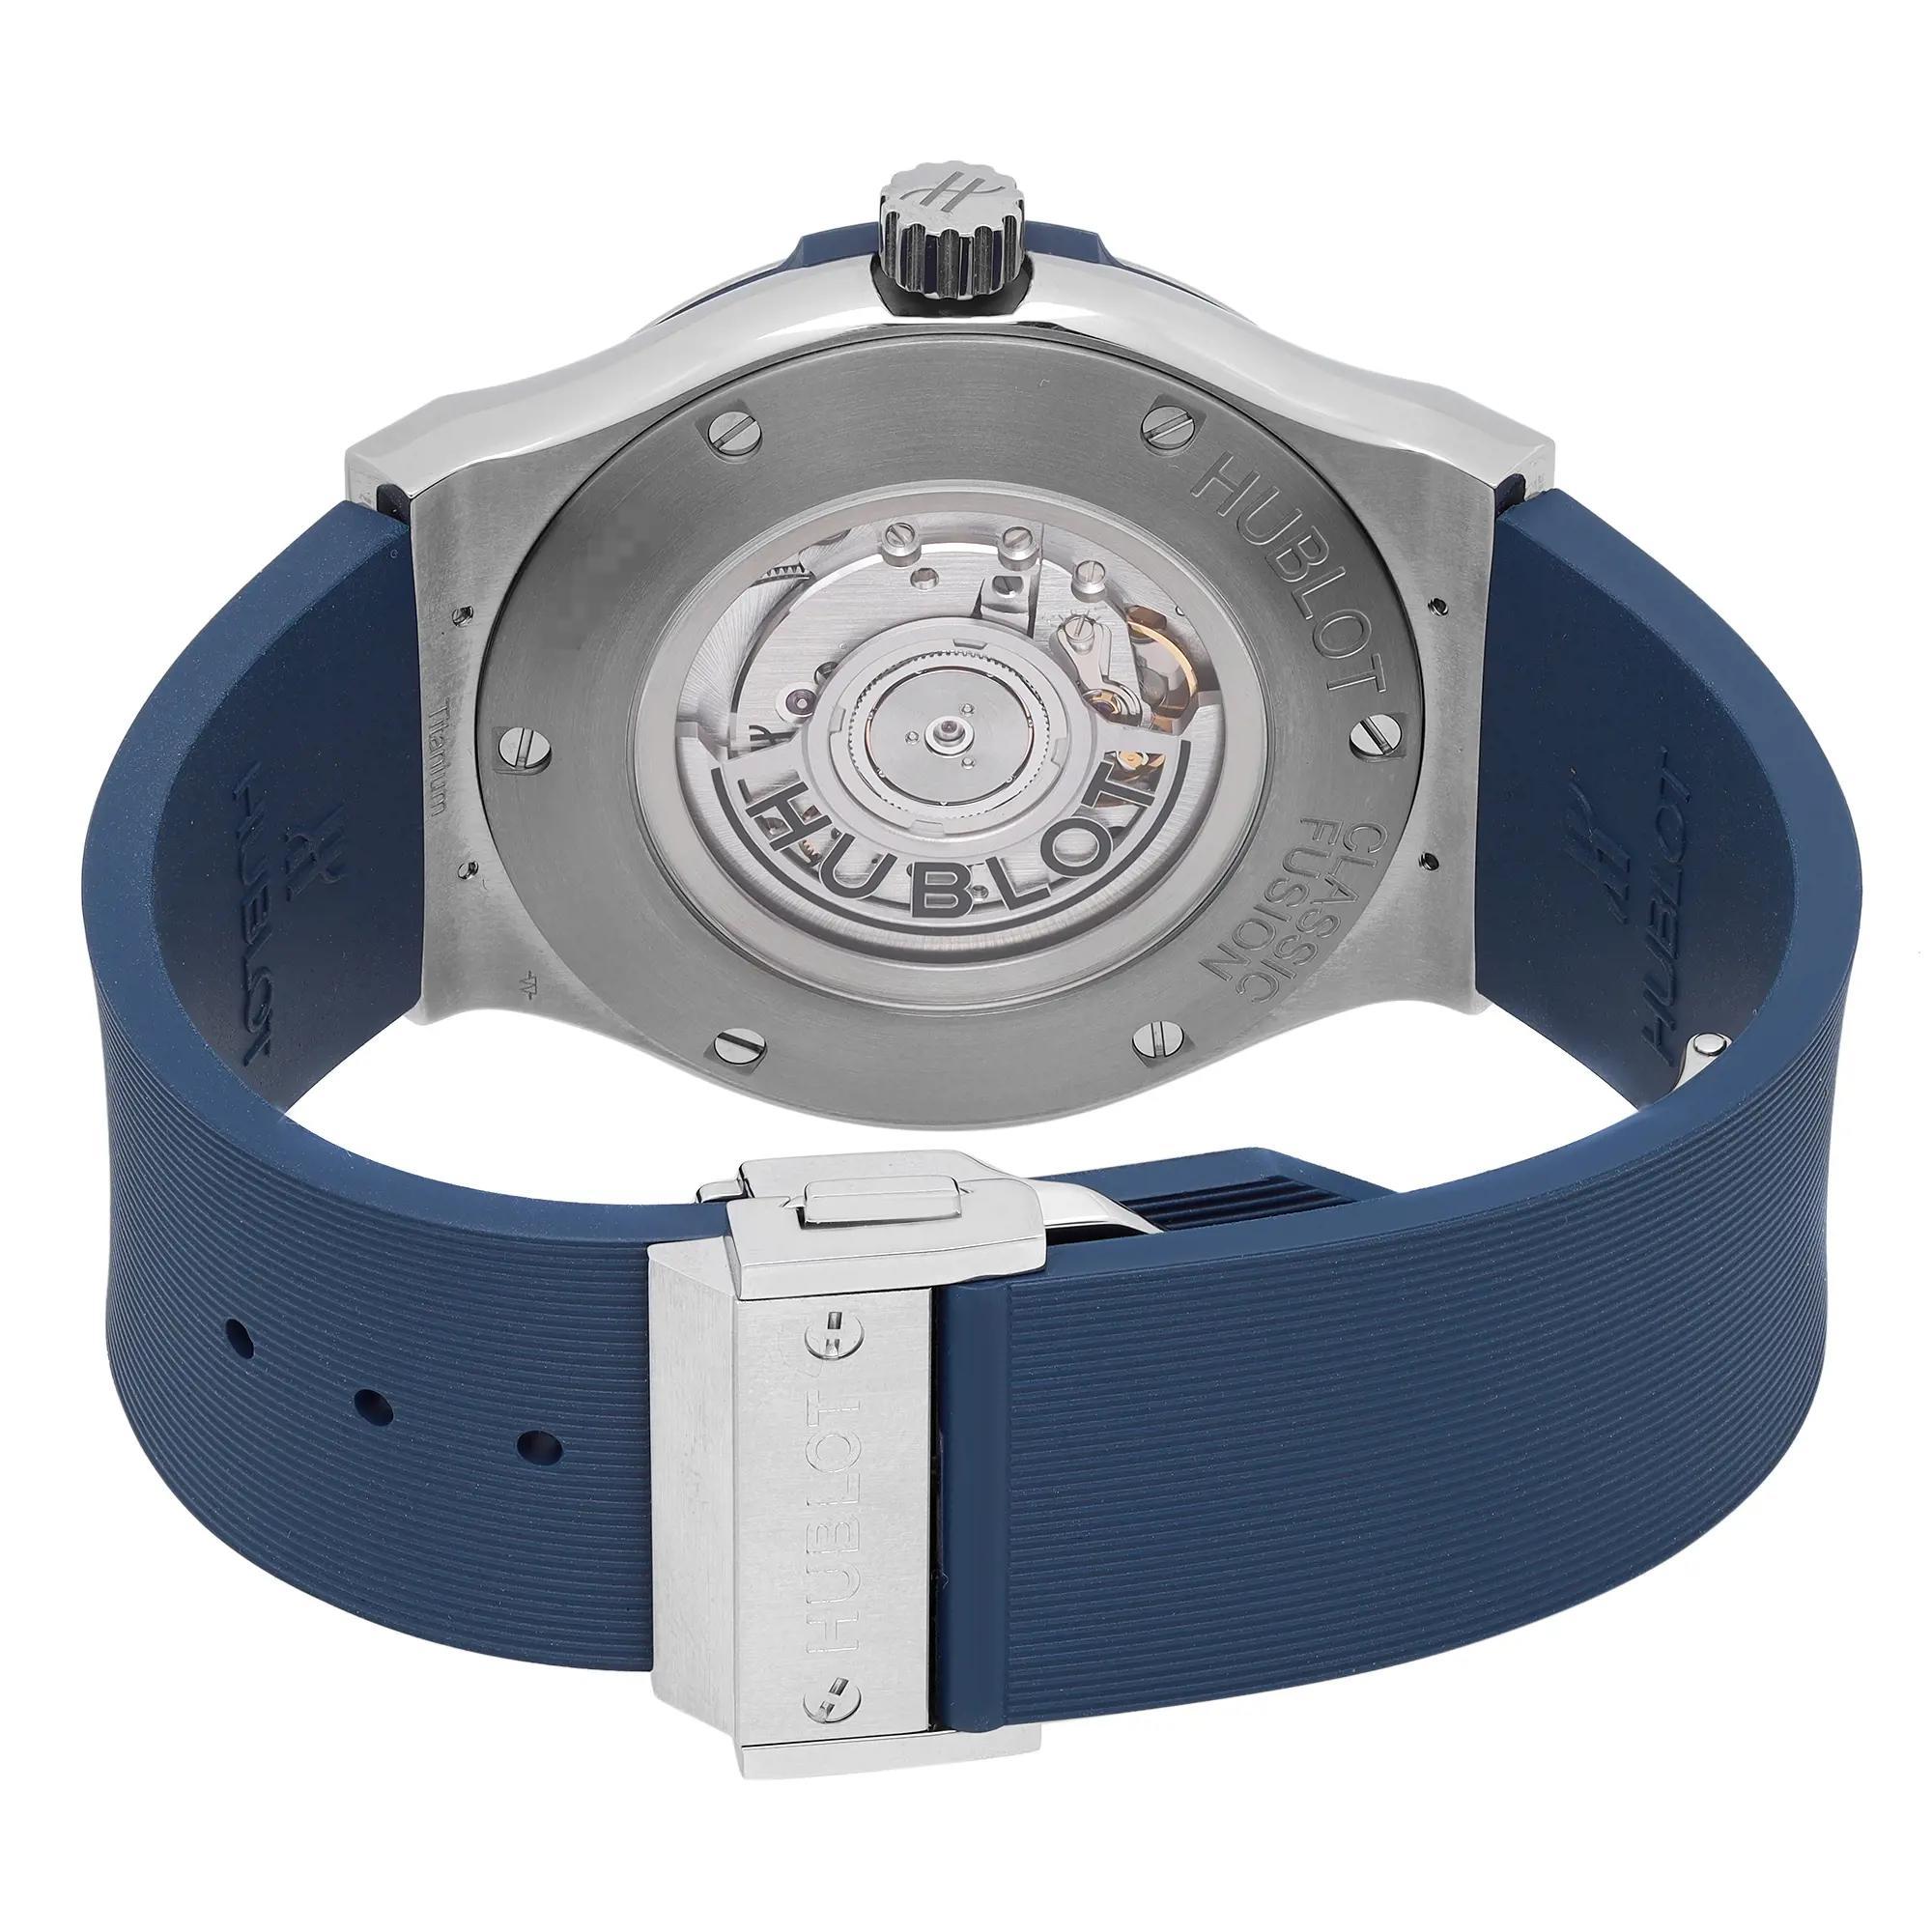 Hublot Classic Fusion Blue Dial Titanium Automtic Mens Watch 511.NX.7170.LR In Excellent Condition For Sale In New York, NY